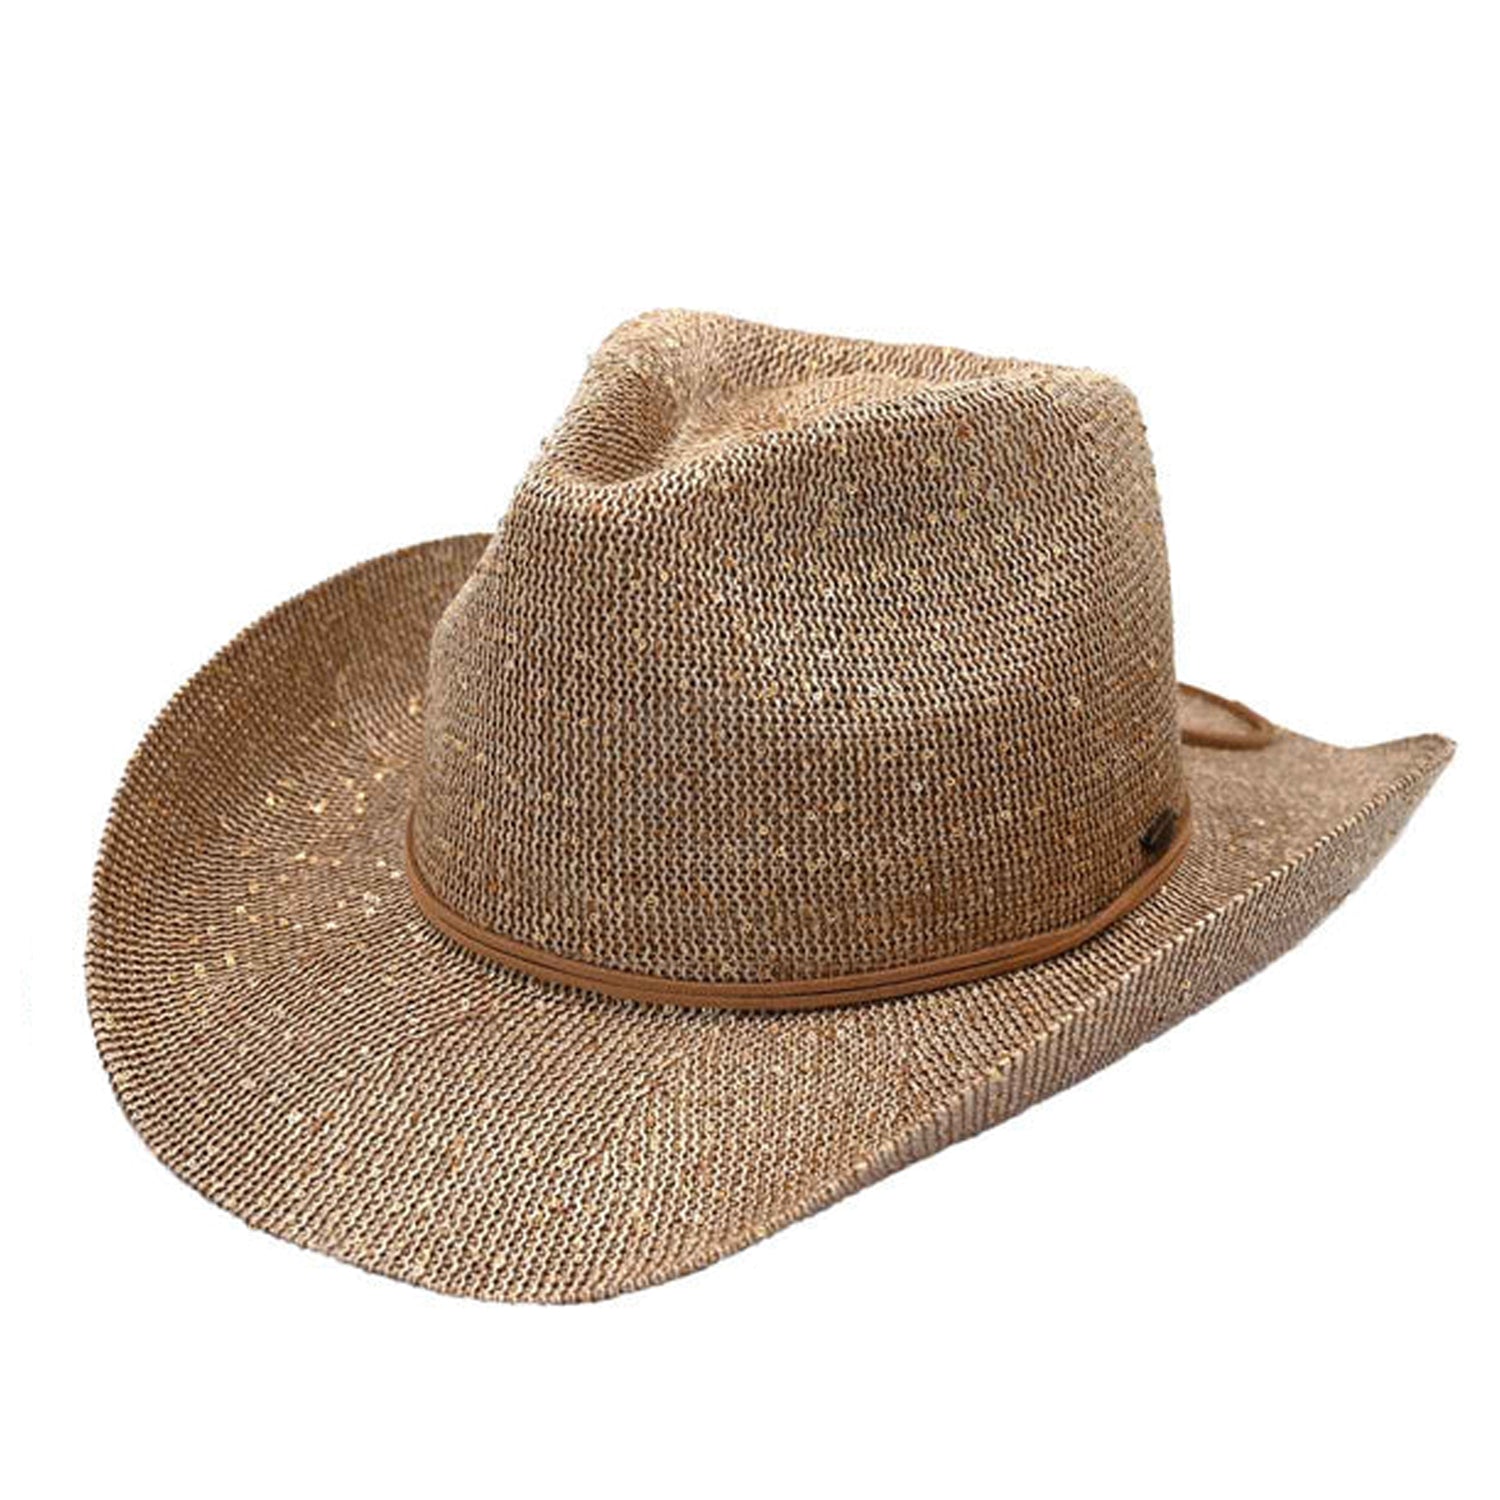 CBC-03 Cowgirl Hat with Glitter Beige